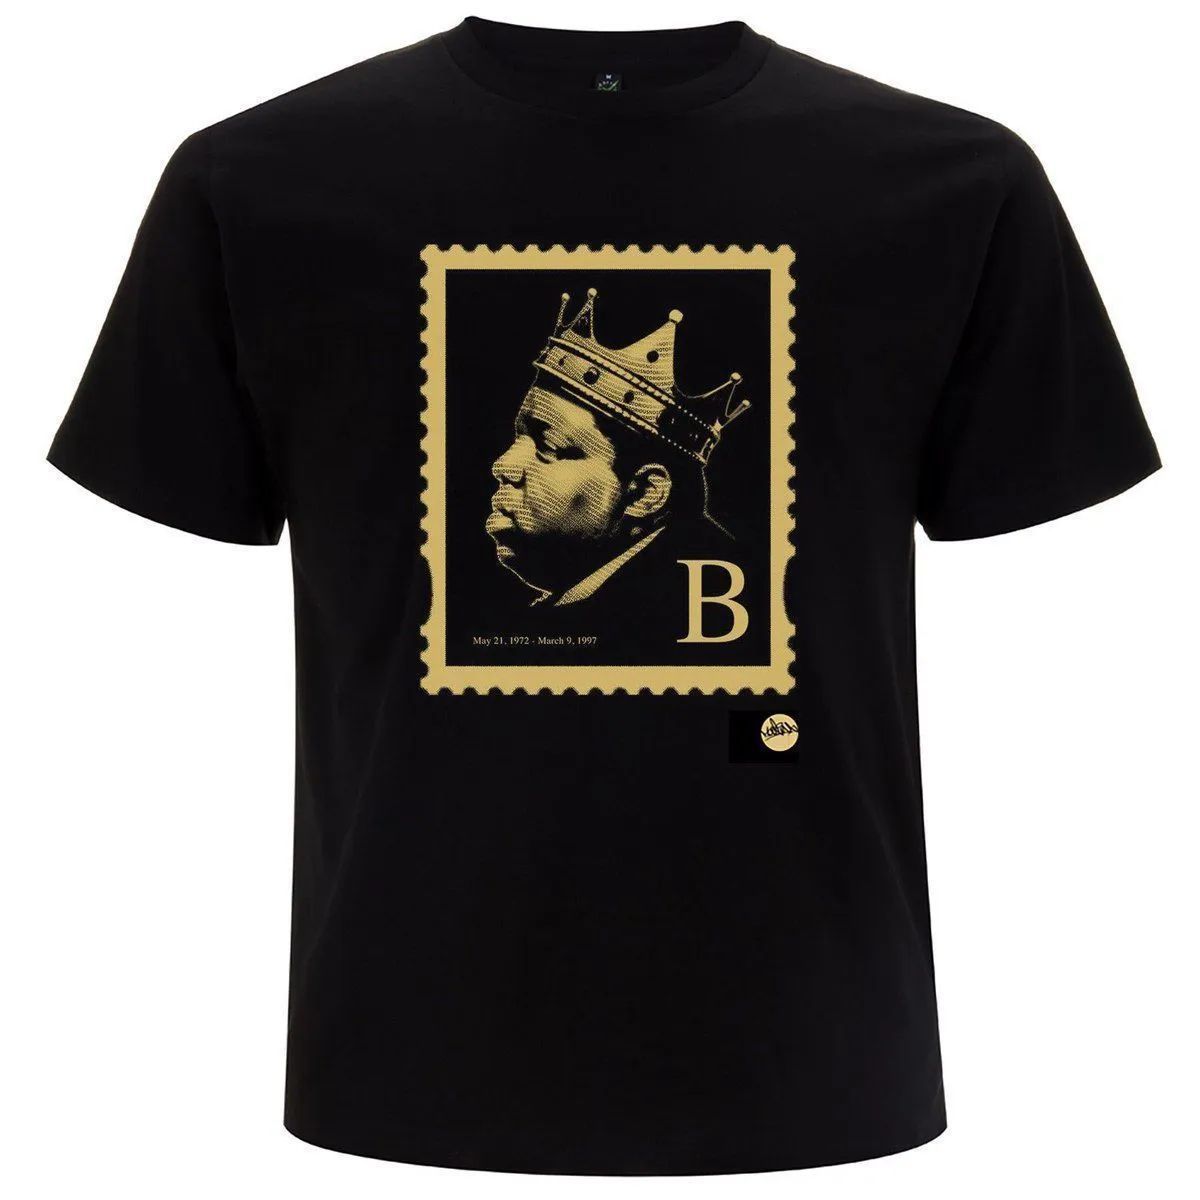 CLEARANCE SALE! NOW UP TO 50% OFF PRODUCTS VISIT THE WEBSITE AND GRAB YOURSELF A BARGAIN! LOW STOCK! The Illest! Biggie Smalls ‘B’ Stamp T-Shirt madina.co.uk/shop/latest/bi… #hiphop #biggiesmalls #notoriousBig